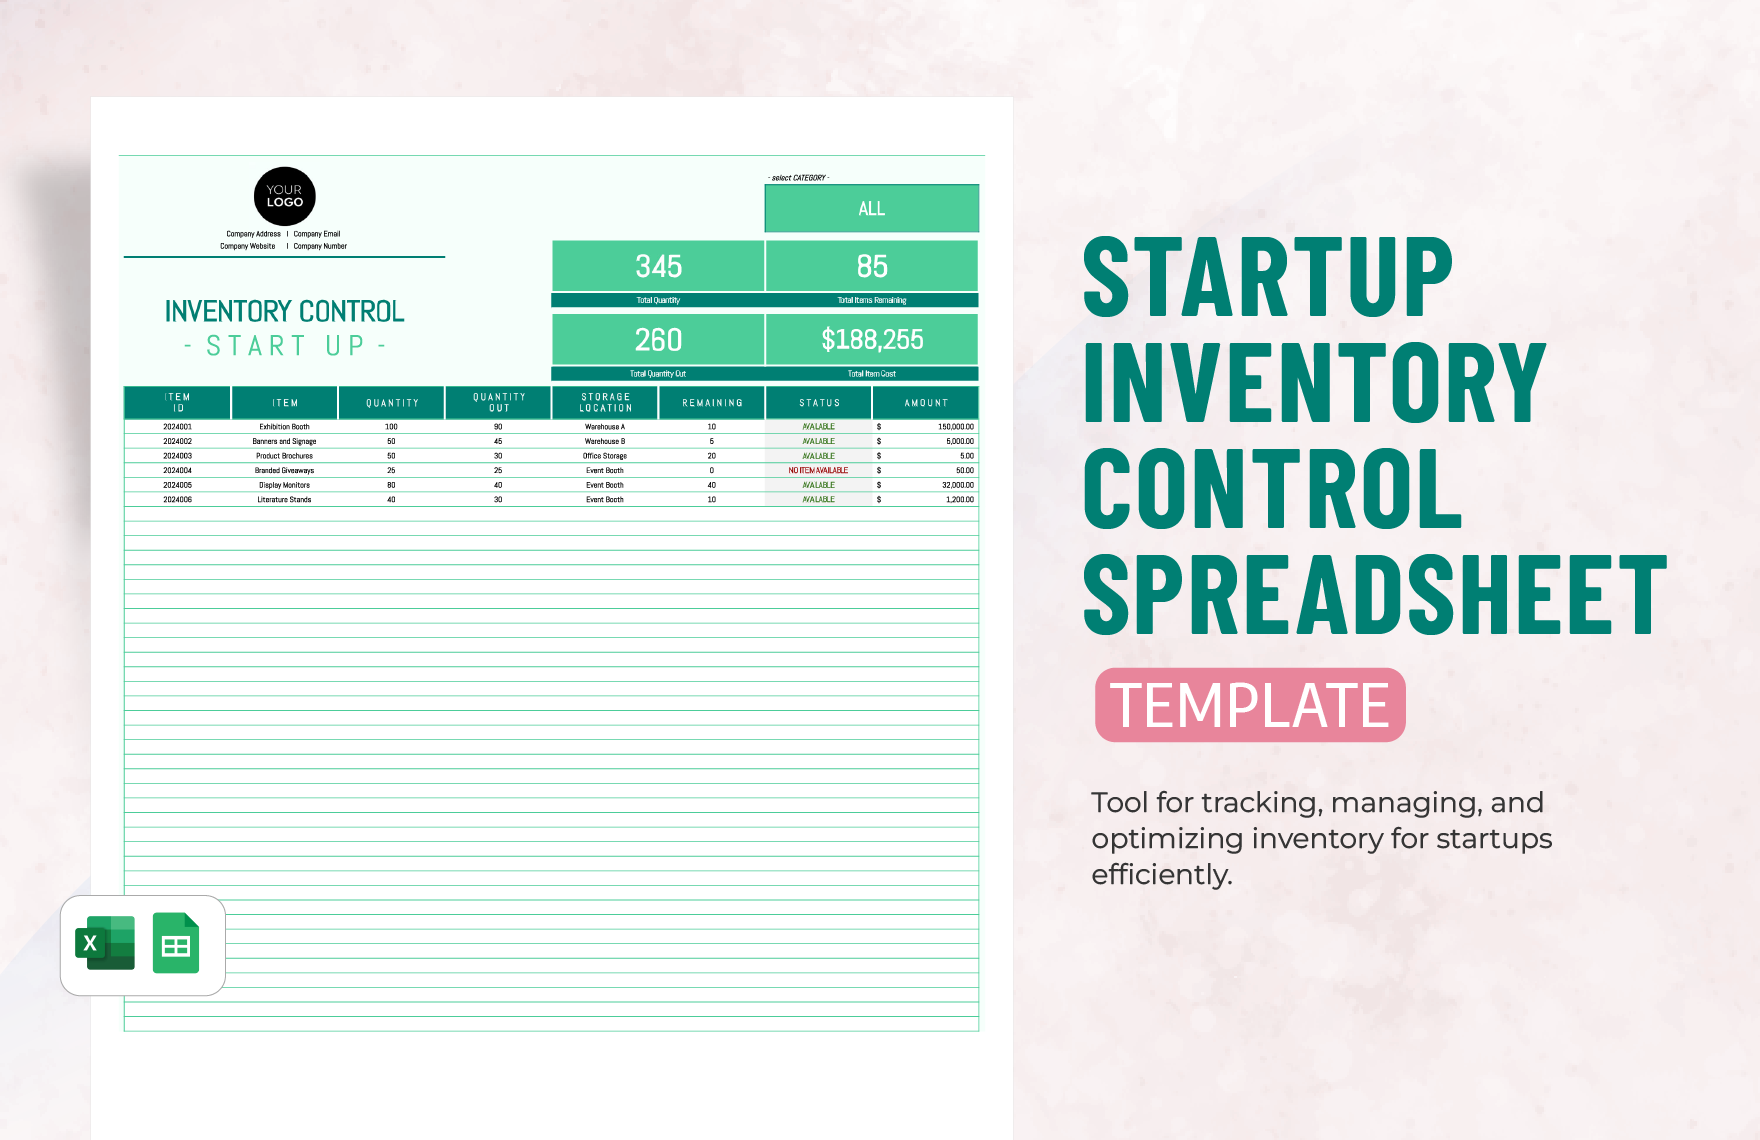 Startup Inventory Control Spreadsheet Template in Excel, Google Sheets